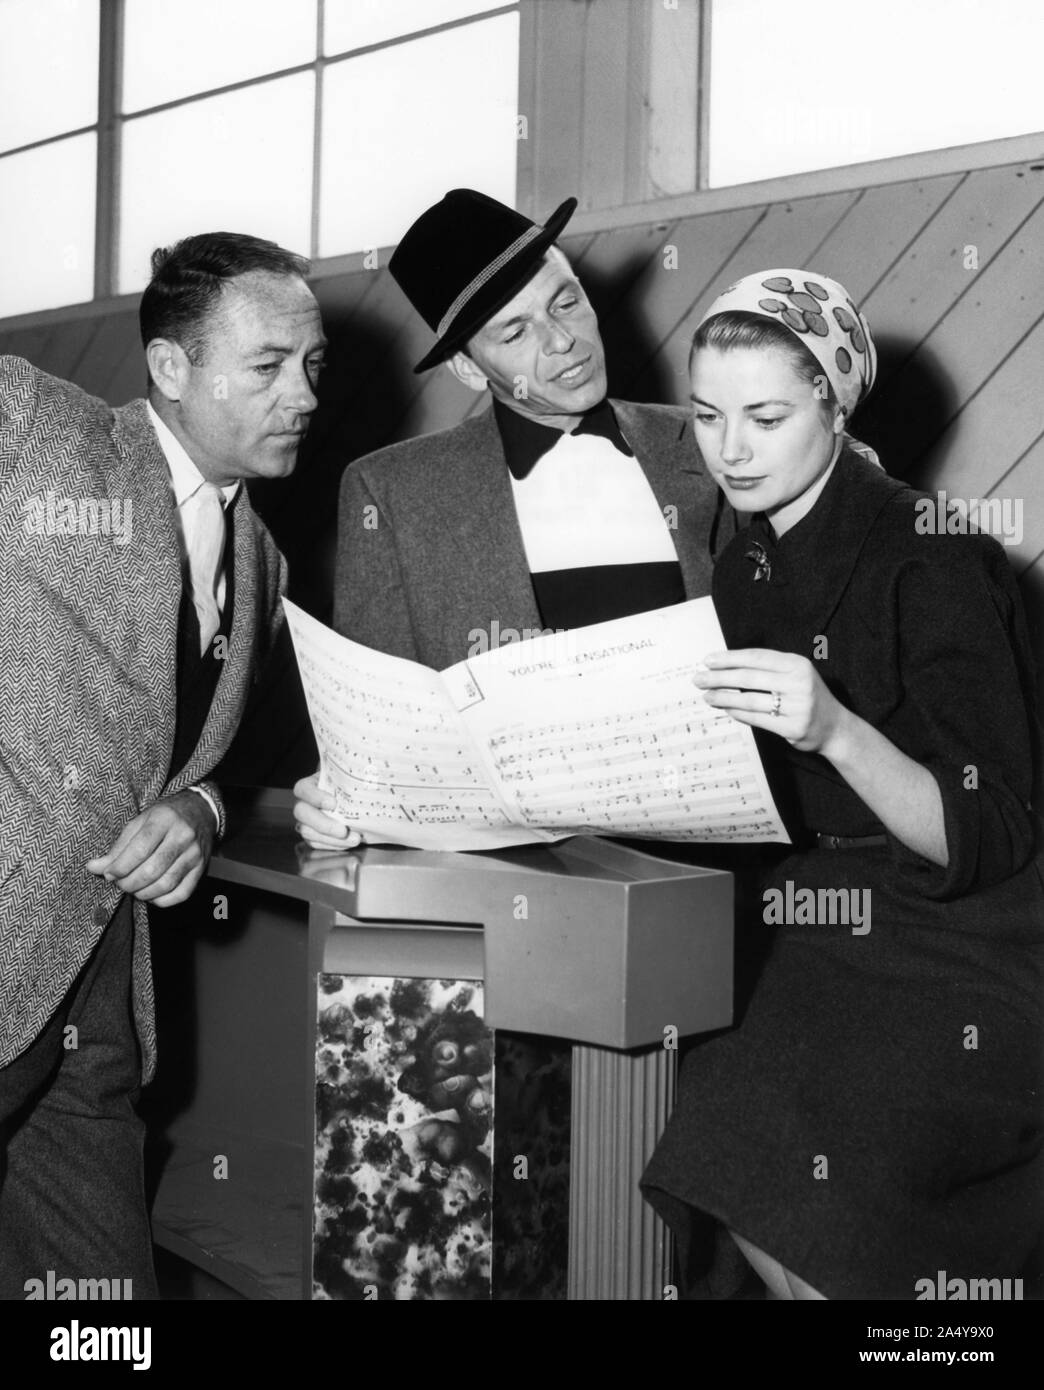 Director CHARLES WALTERS FRANK SINATRA and GRACE KELLY song rehearsal of You're Sensational by COLE PORTER for HIGH SOCIETY 1956 Sol C. Siegel Productions / Bing Crosby Productions / Metro Goldwyn Mayer Stock Photo